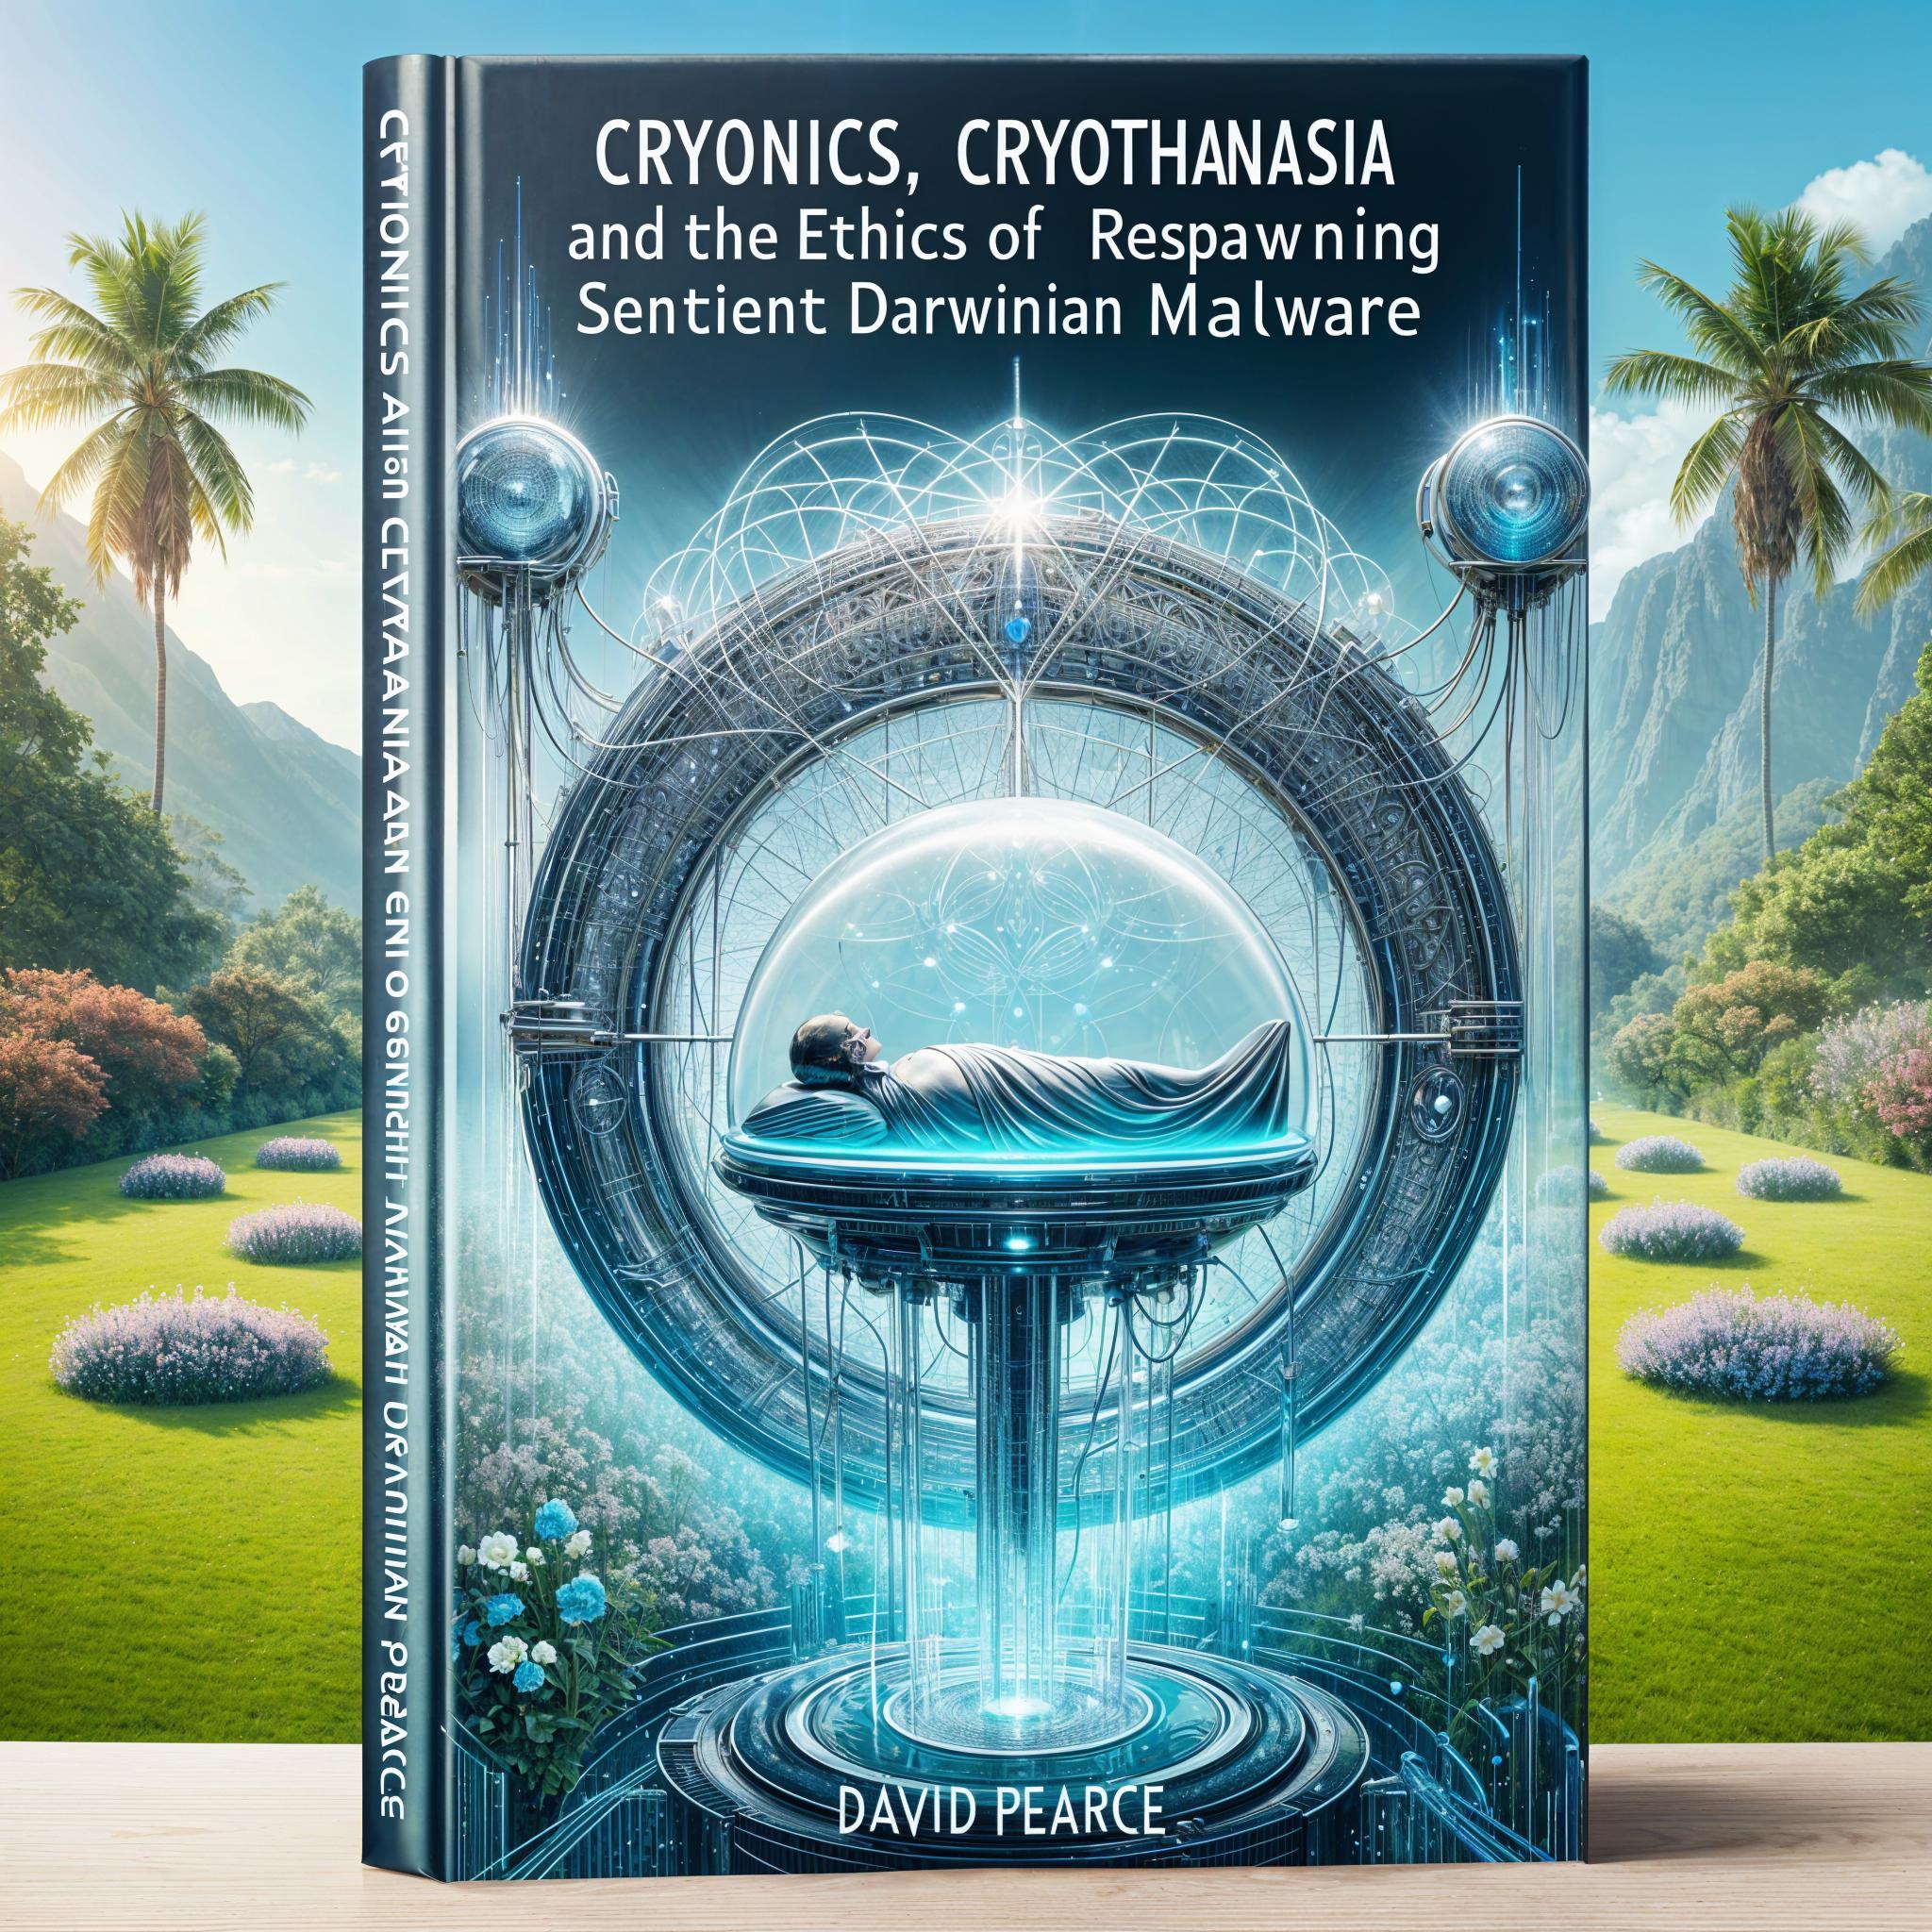 Cryothanasia, Cryonics and the Ethics of Respawning Sentient Darwinian Malware by David Pearce